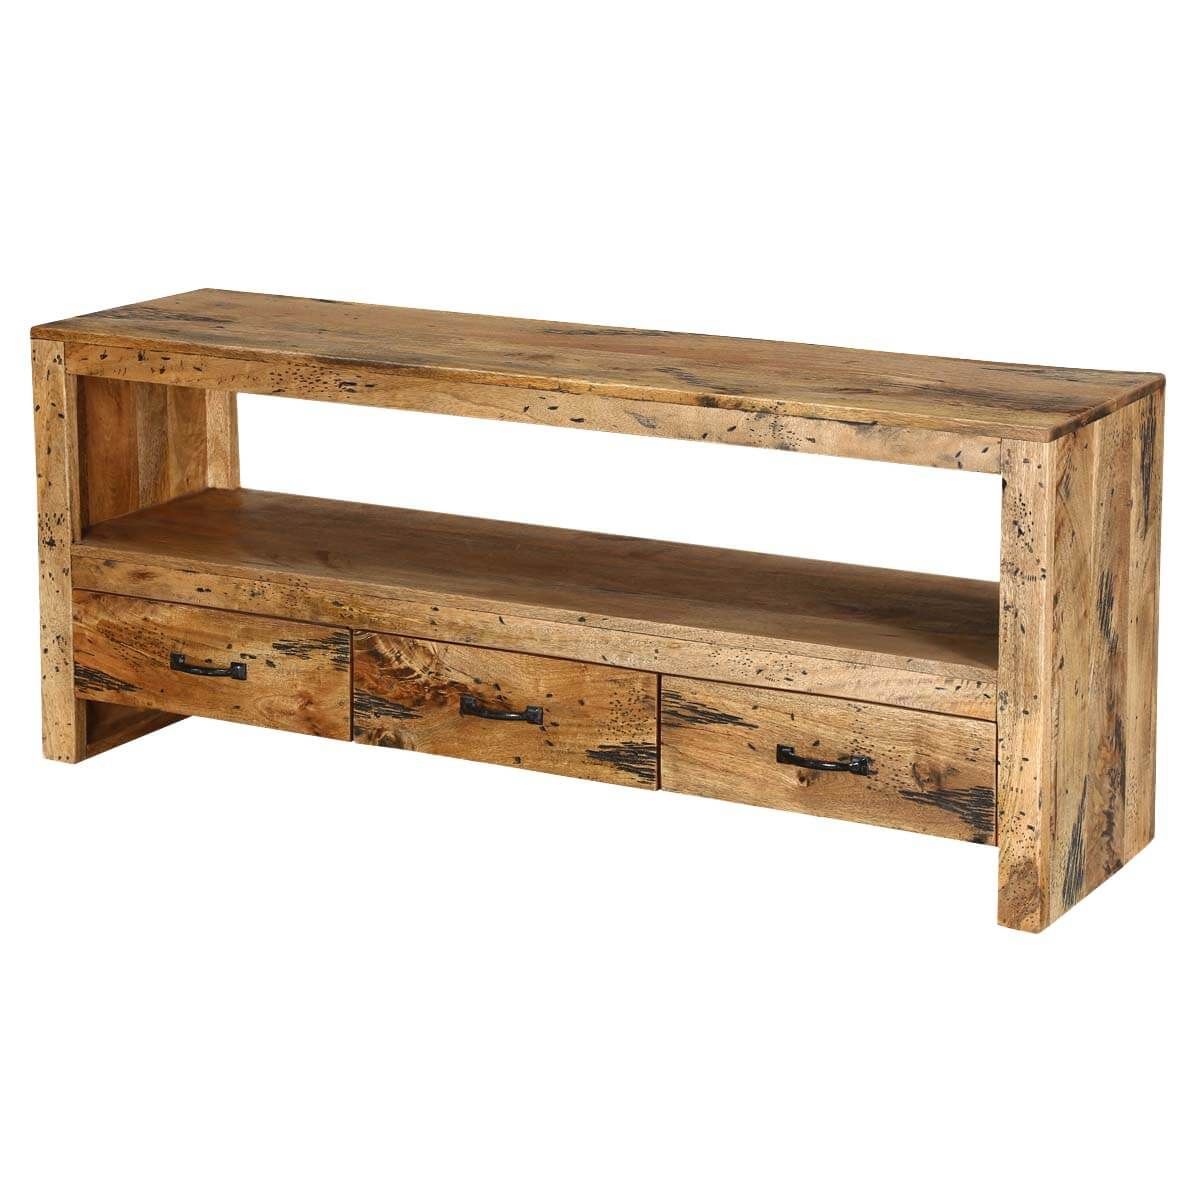 Virginia Smart Handcrafted Mango Wood 57" Wide Rustic Tv Stand For Mango Wood Tv Stands (View 8 of 15)